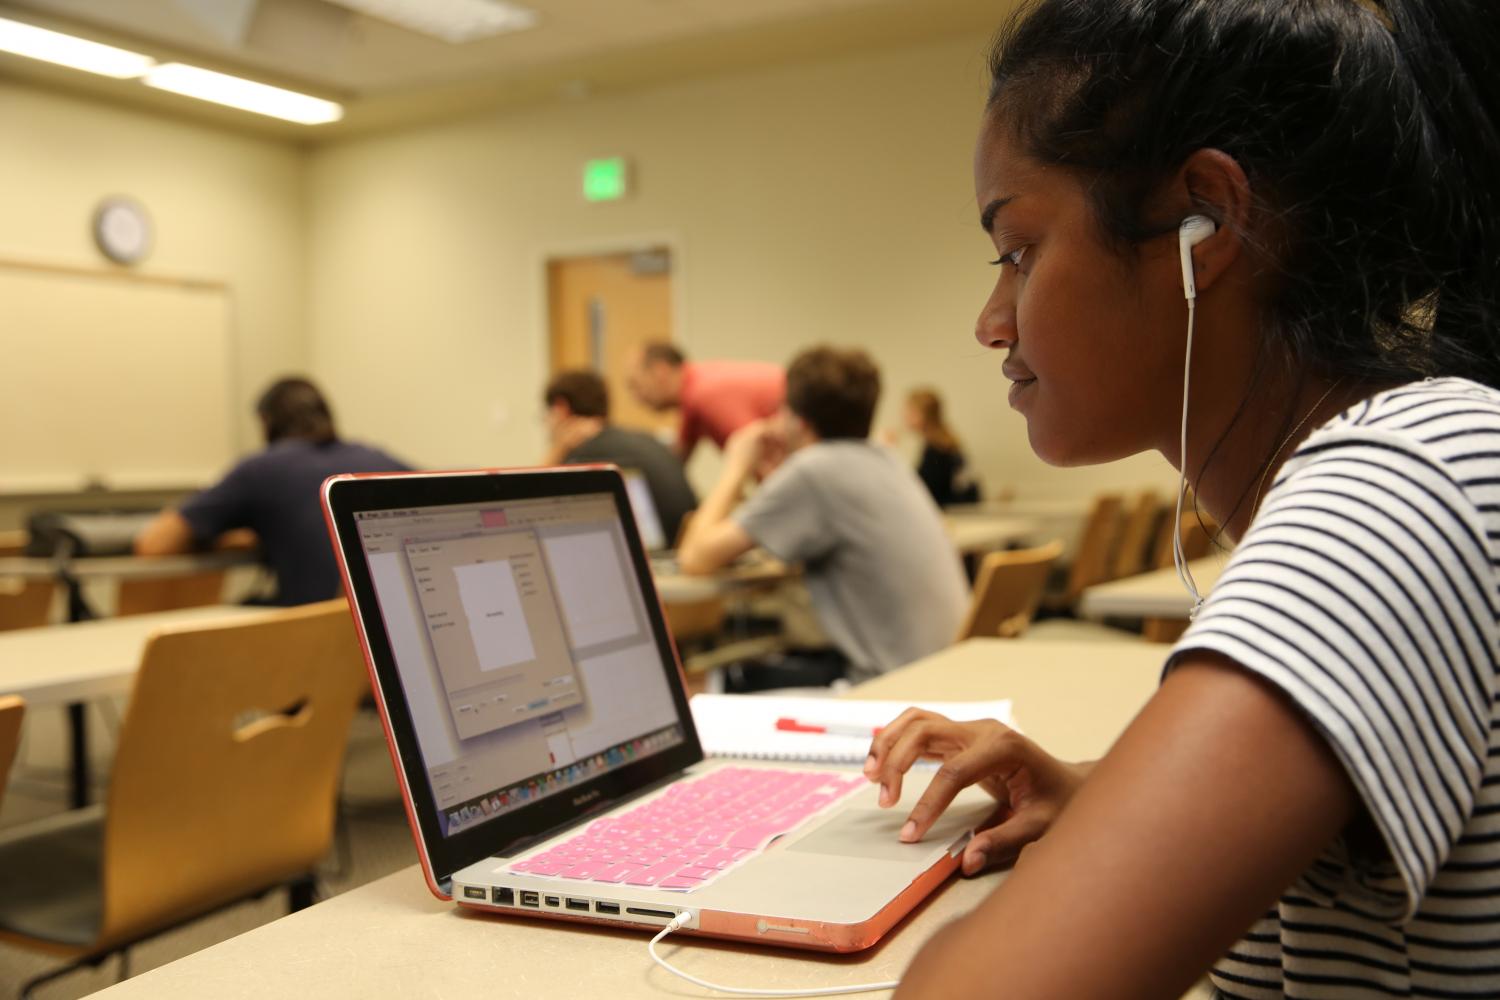 A student focusing intently on a software program on her laptop during class.